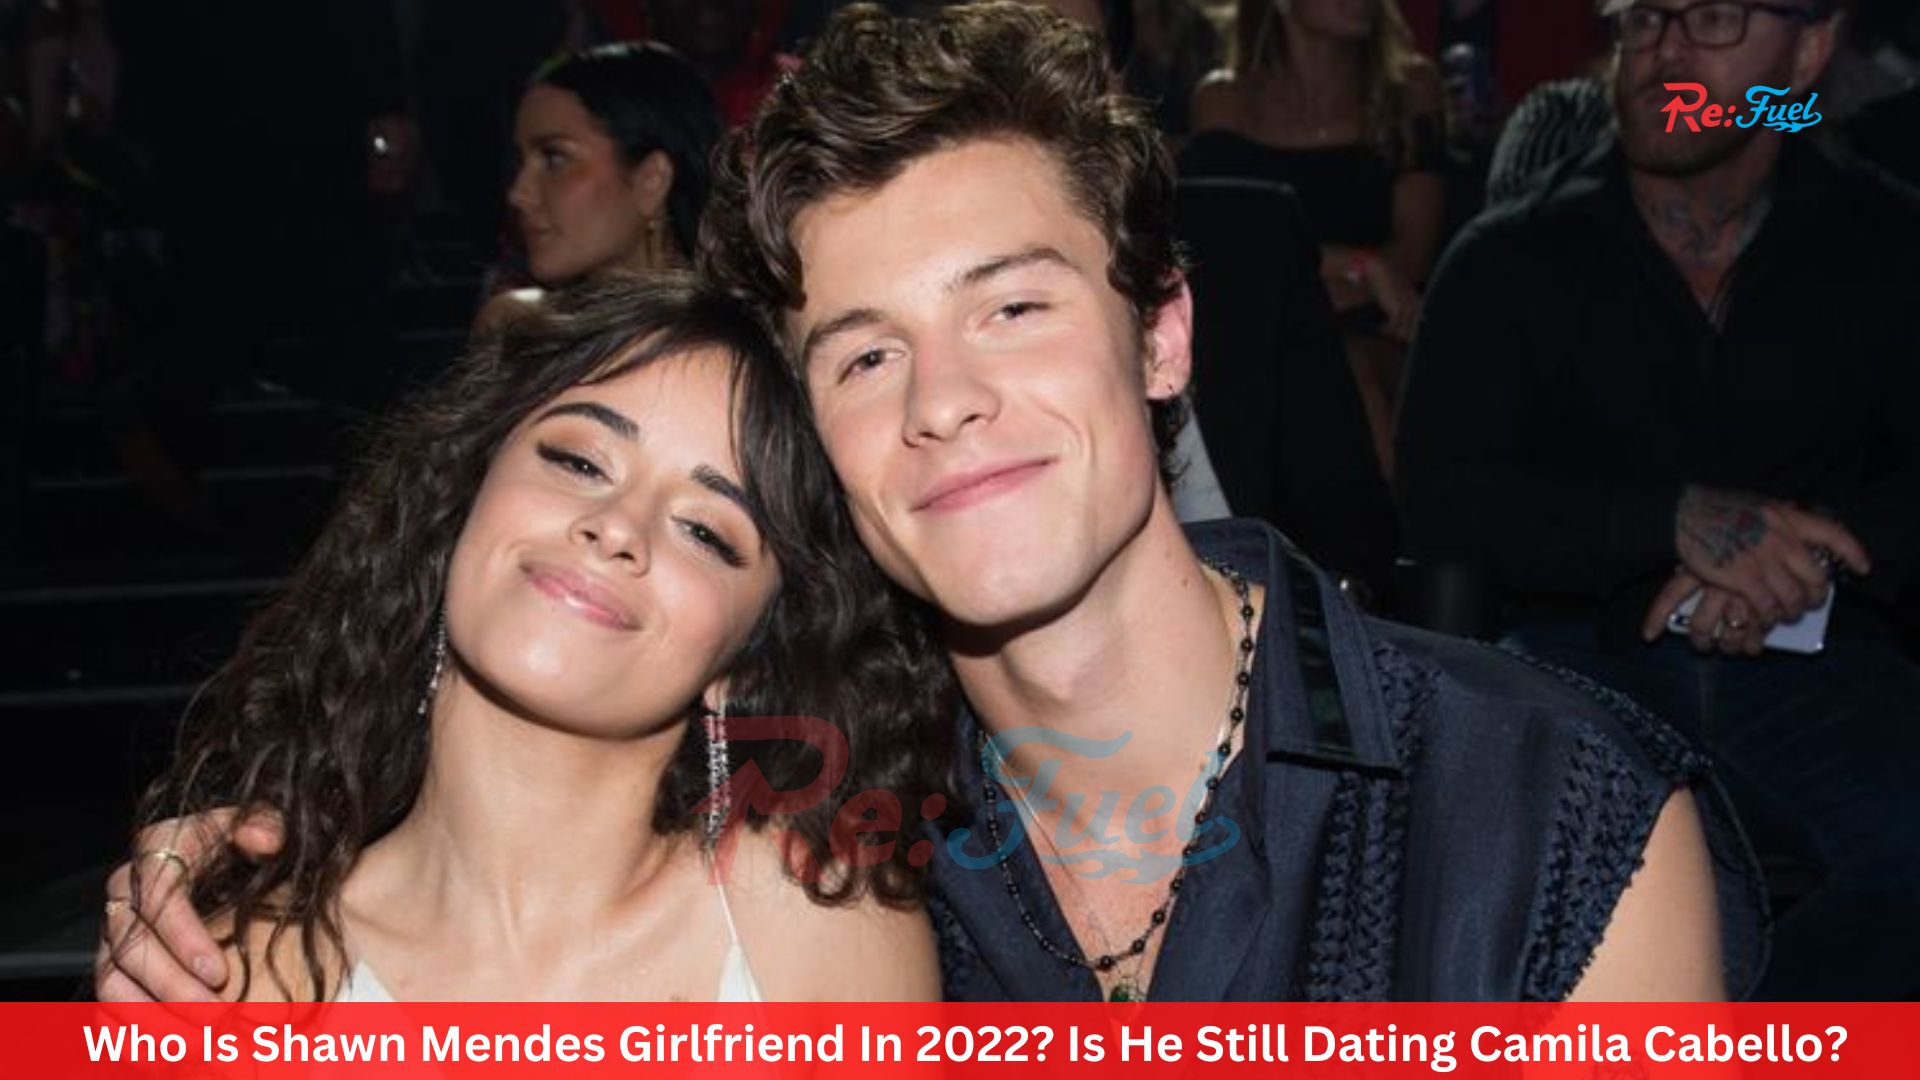 Who Is Shawn Mendes Girlfriend In 2022? Is He Still Dating Camila Cabello?